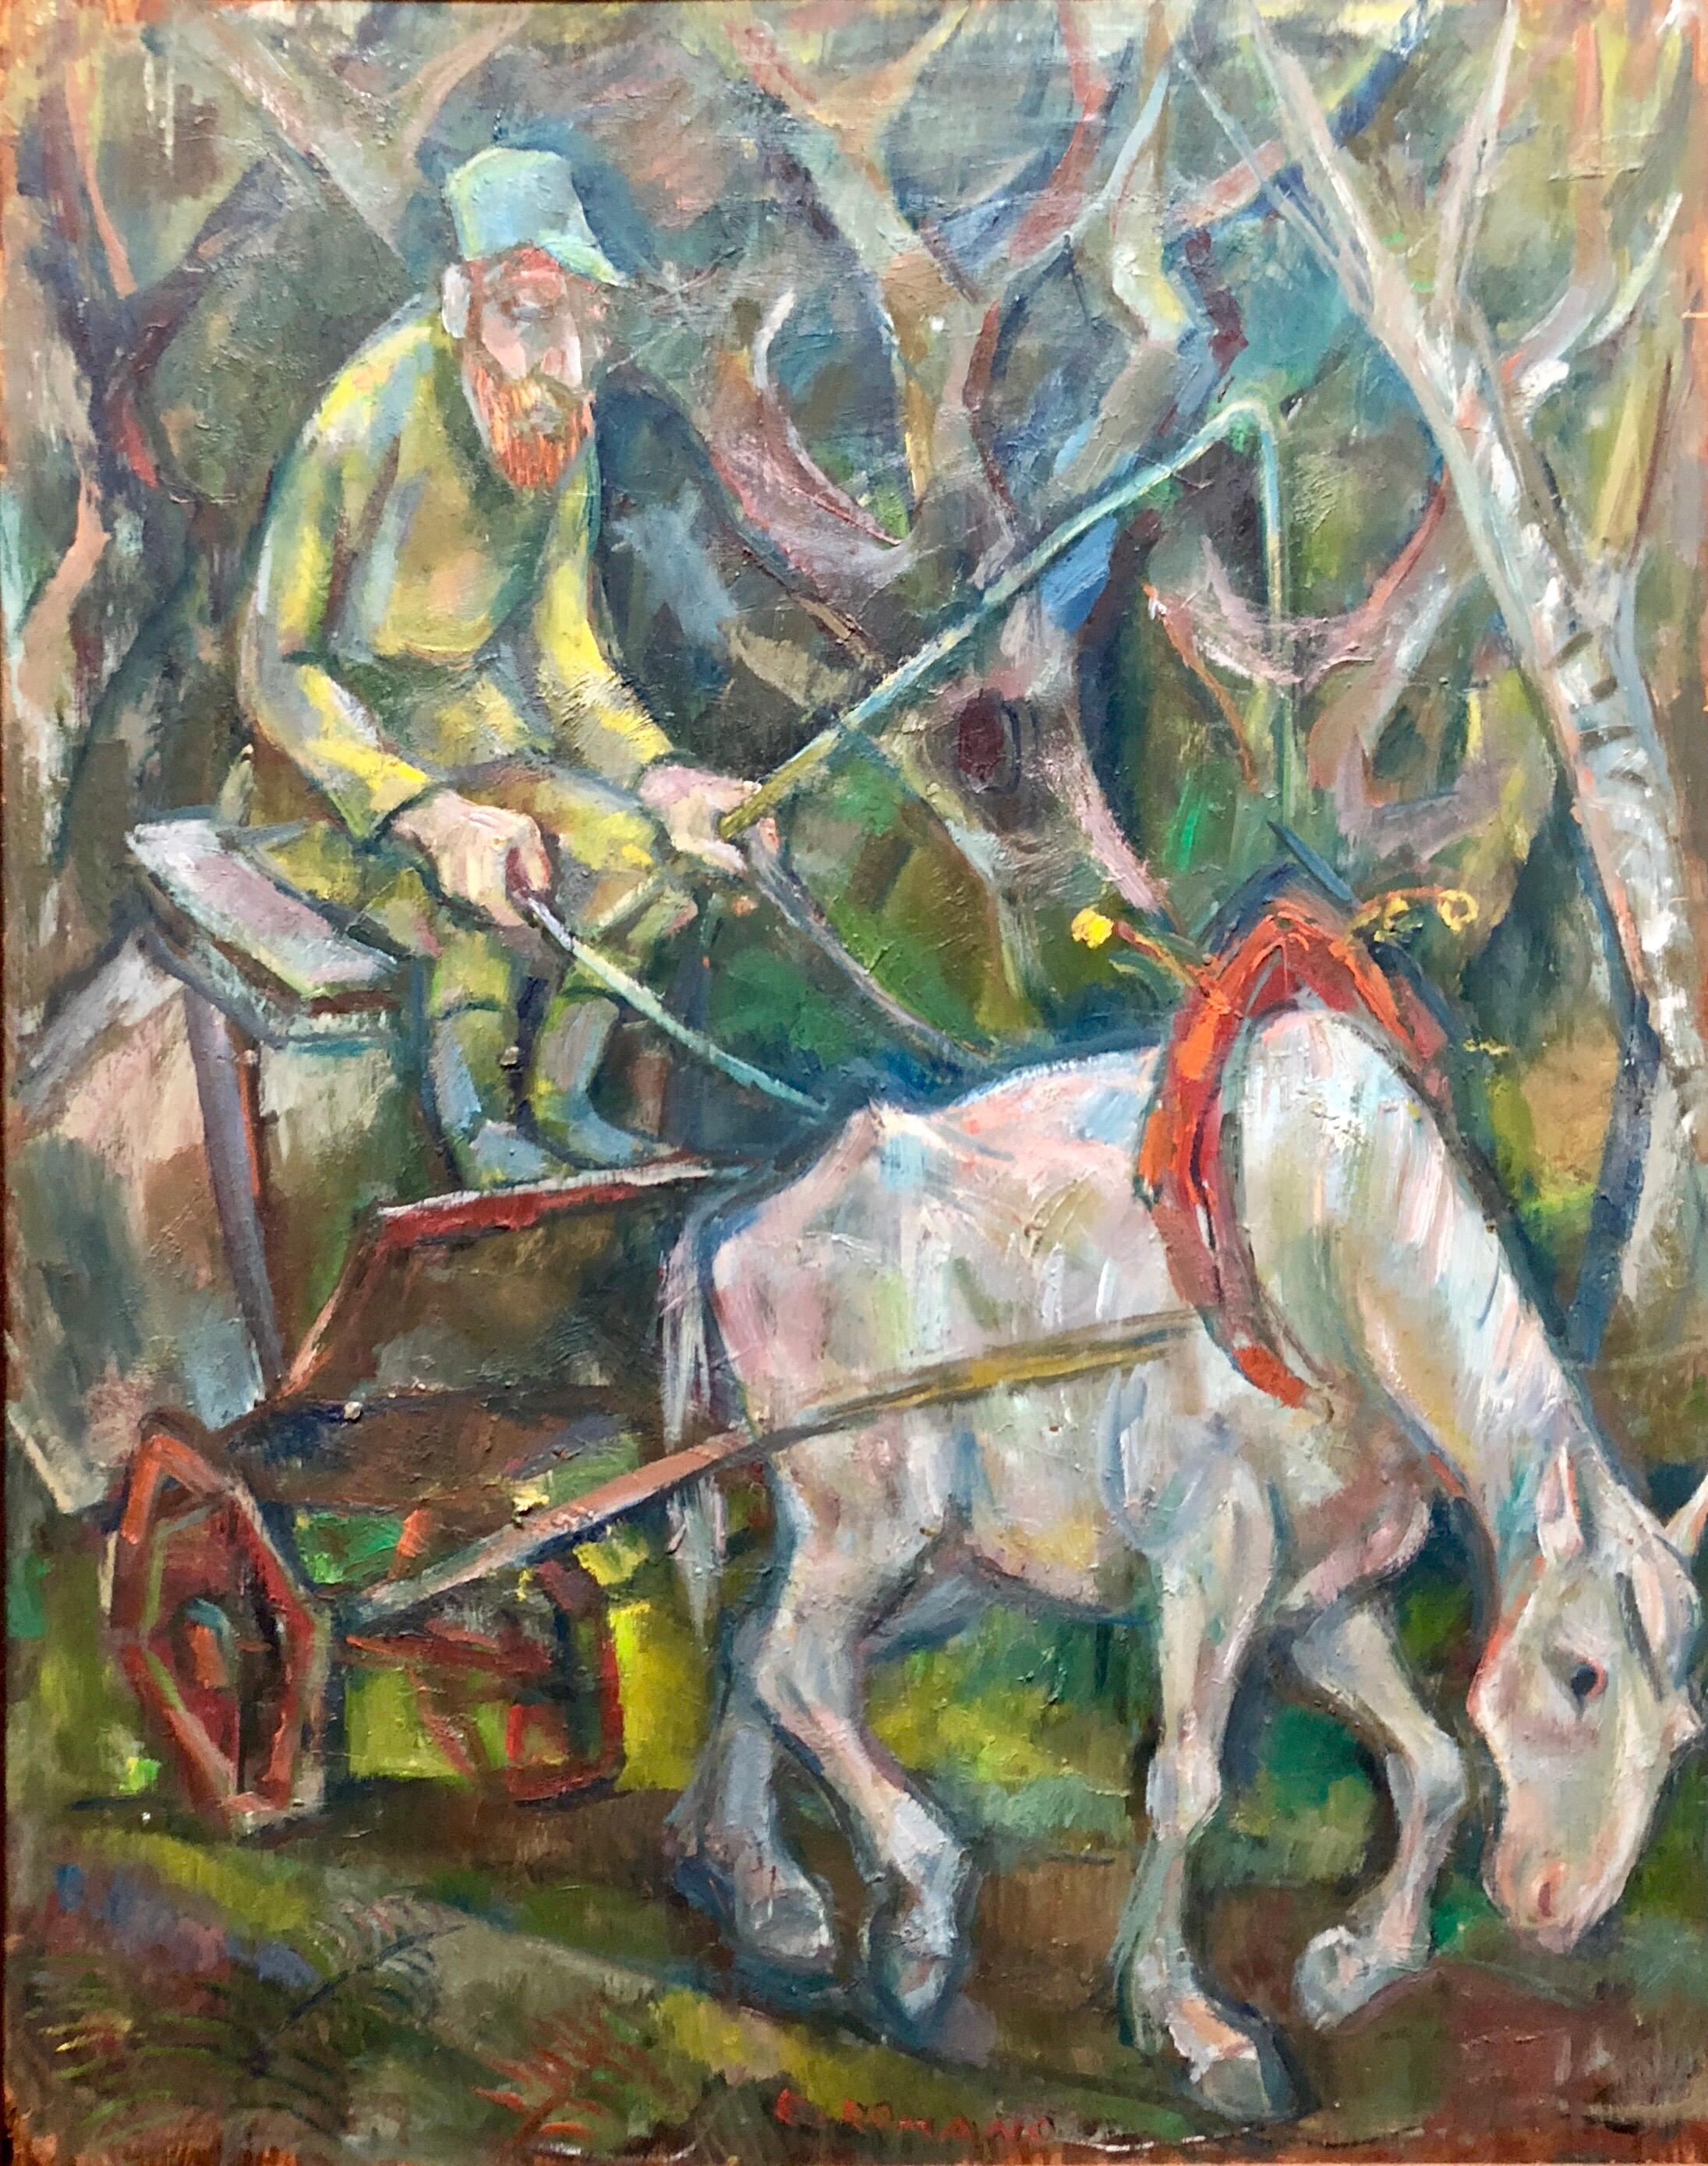 Genre: Modern
Subject: Landscape with figure of horse, driver and wagon
Medium: Oil
Surface: wood Board 


EMANUEL ROMANO
Rome, Italy, b. 1897, d. 1984
Emanuel Glicen Romano was born in Rome, September 23, 1897. 

His father Henryk Glicenstein was a